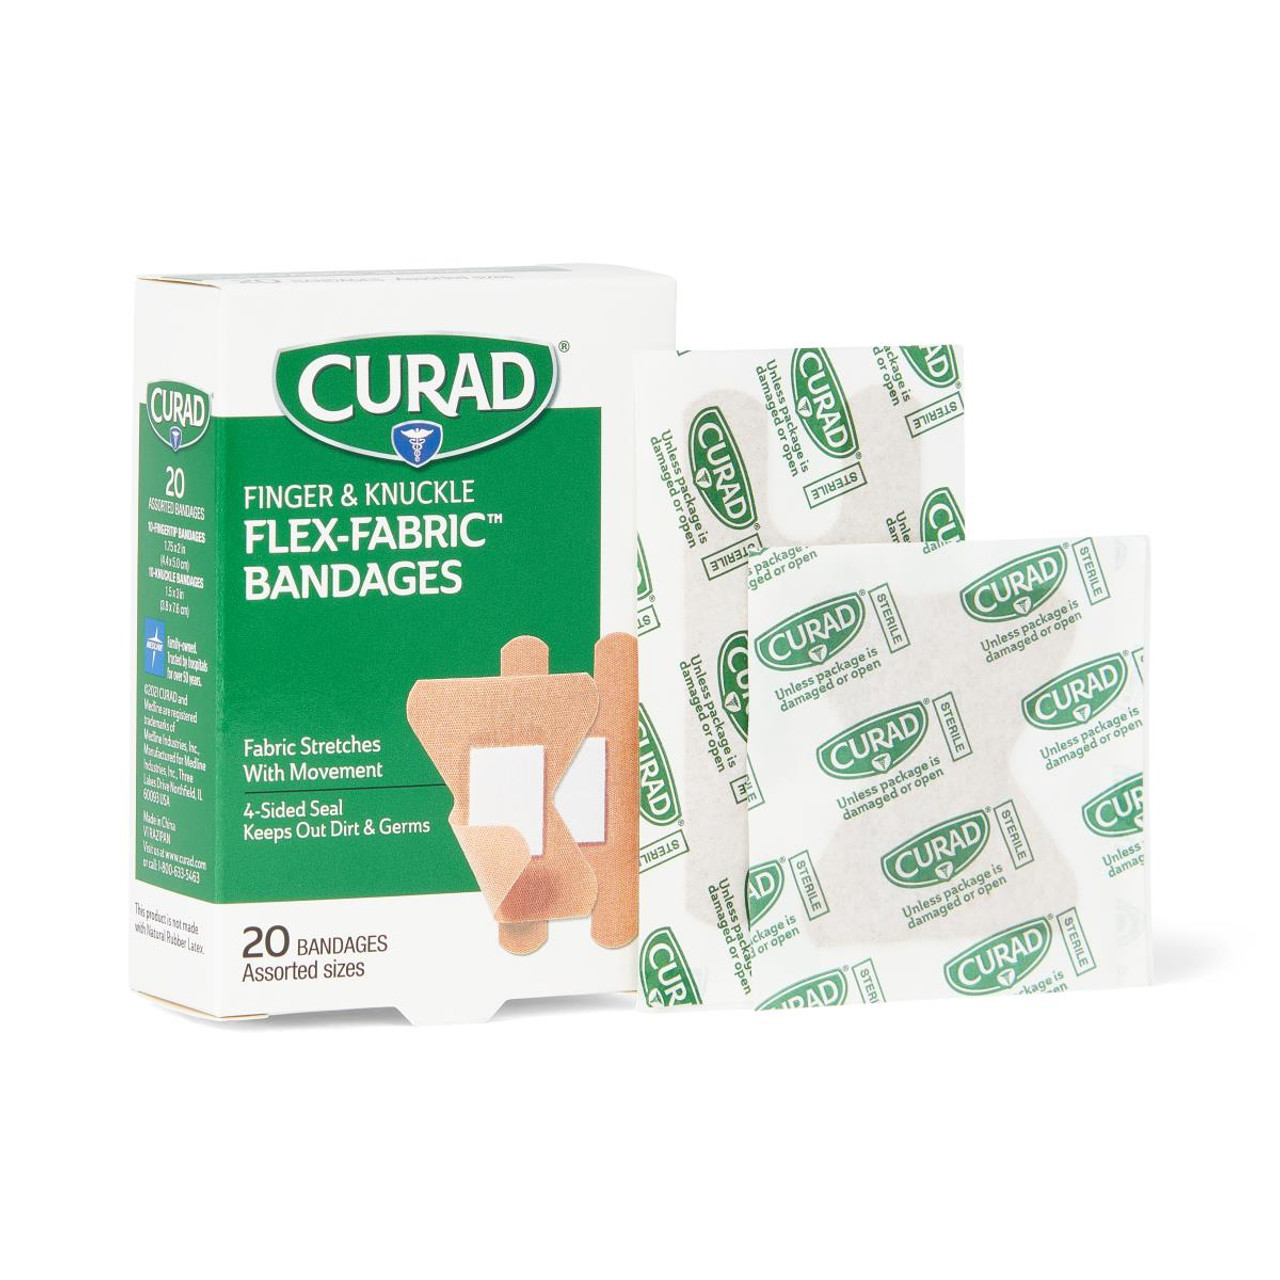 CURAD Flex-Fabric Adhesive Bandages for Fingertip & Knuckle